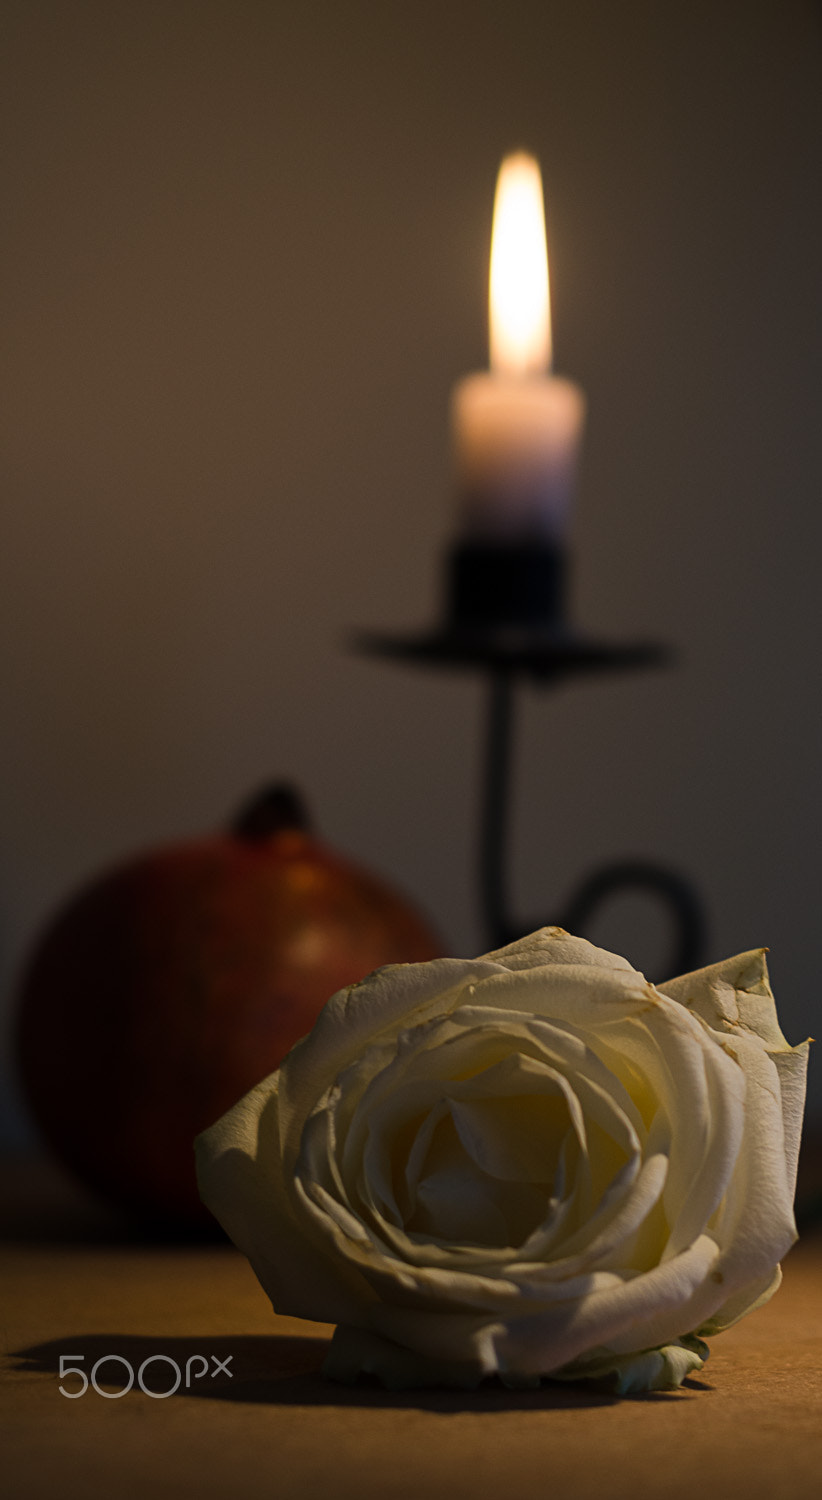 Nikon D7000 sample photo. A dying rose photography